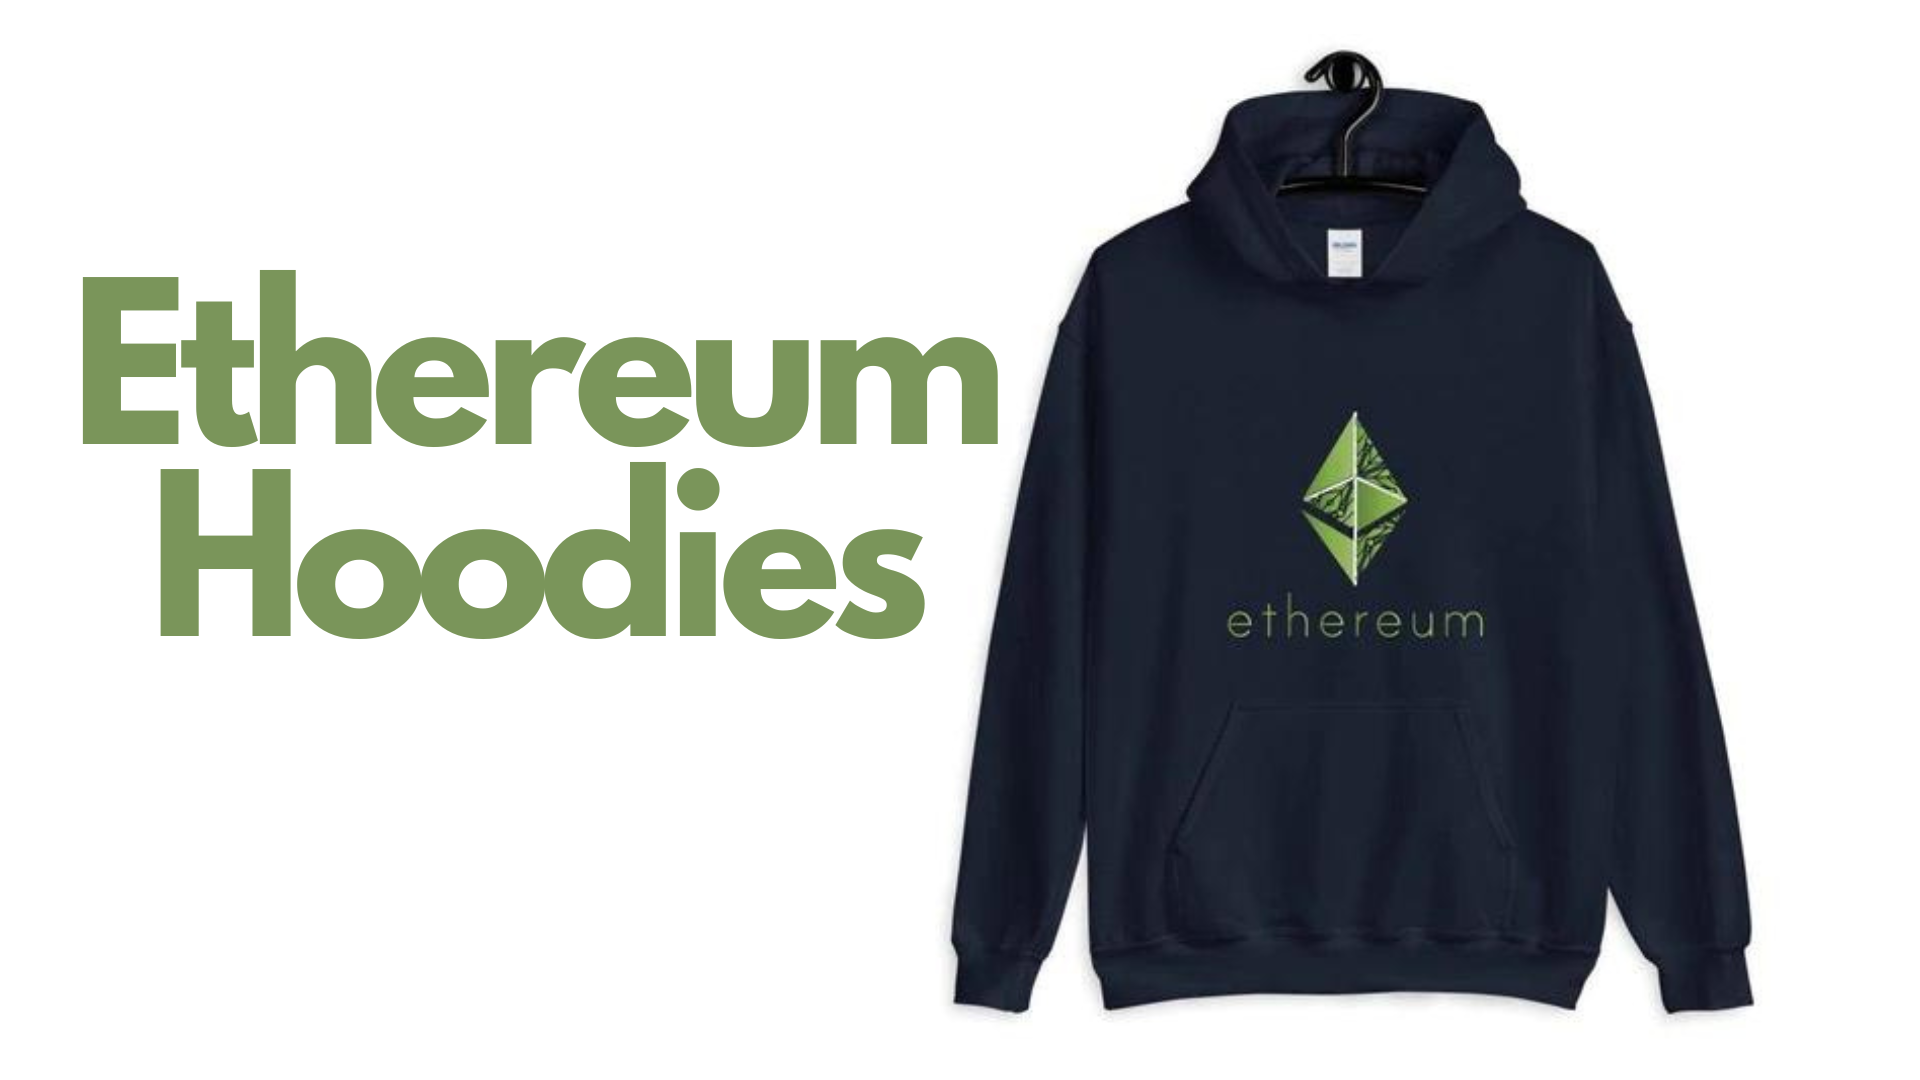 A black hoodie with Ethereum logo